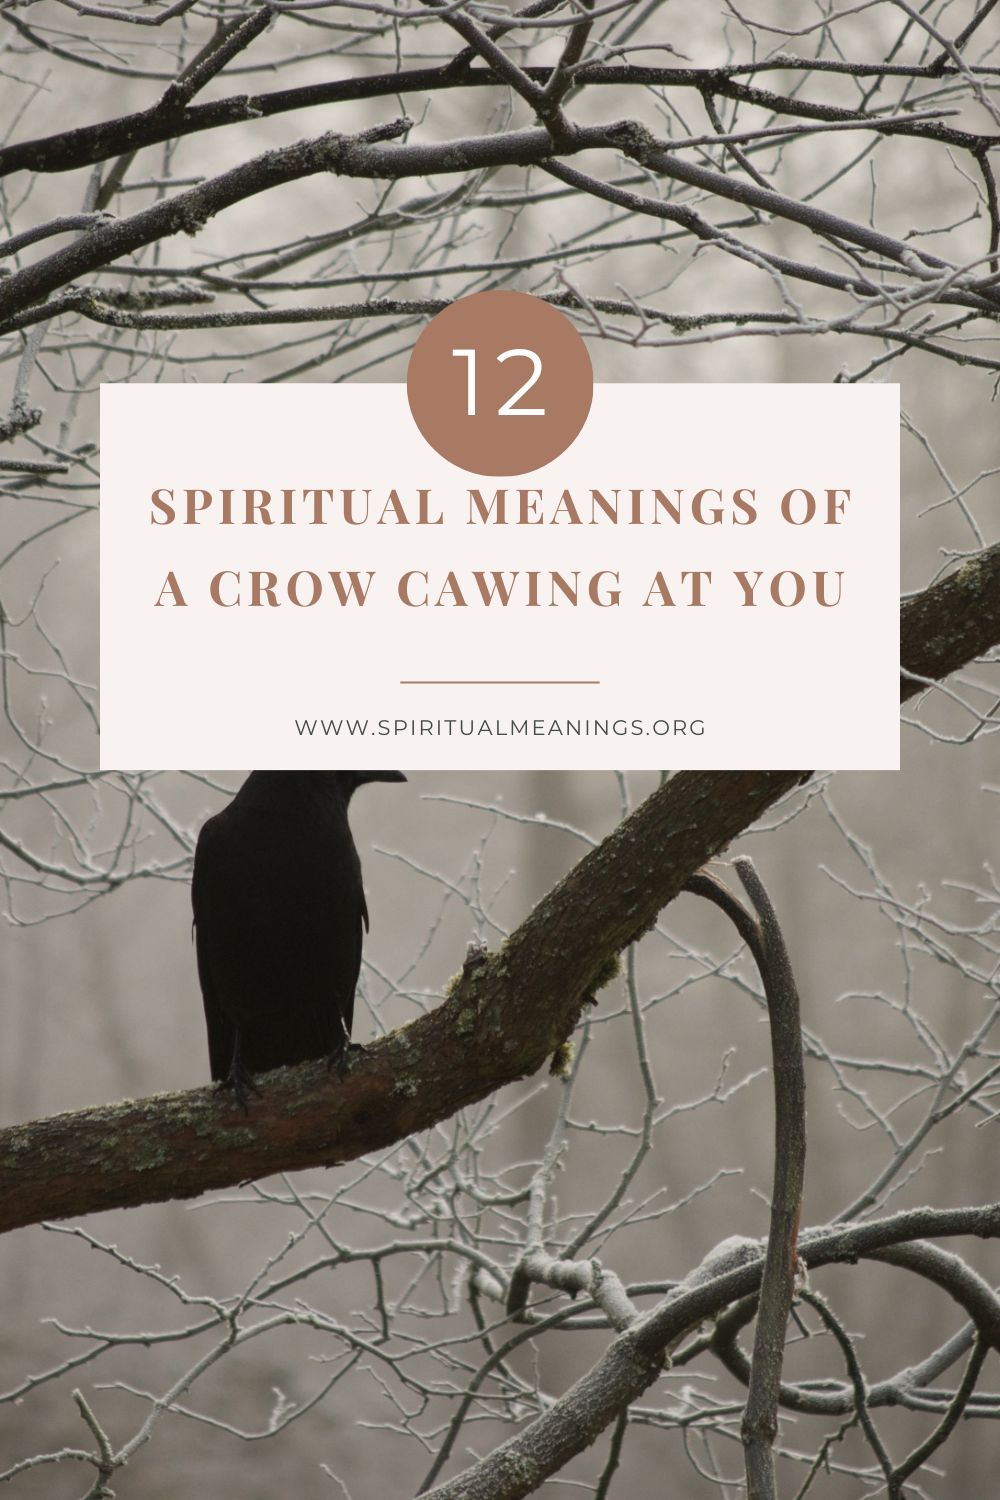 Different Crow Cawing Scenarios And Their Possible Spiritual Meanings